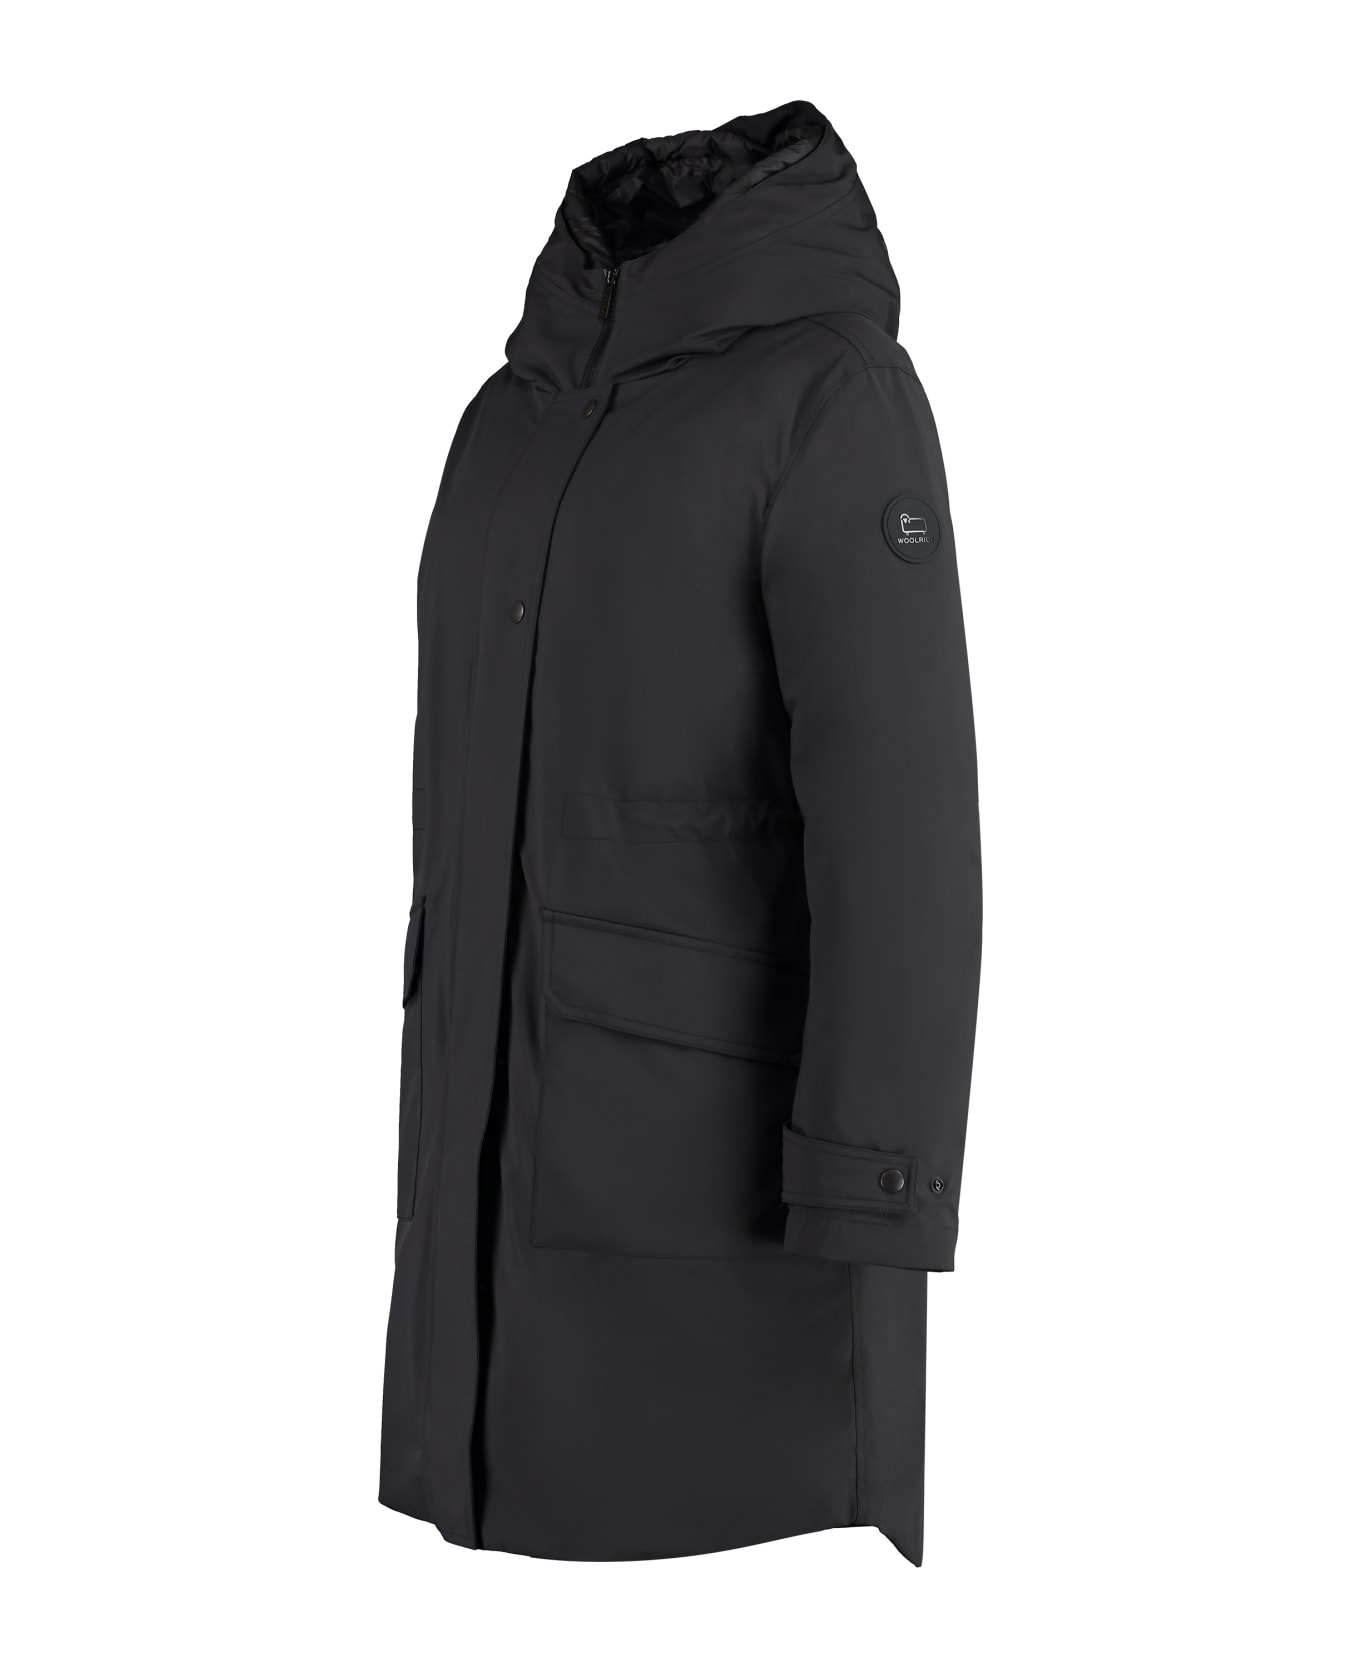 Woolrich Military Technical Fabric Parka With Internal Removable Down Jacket - black